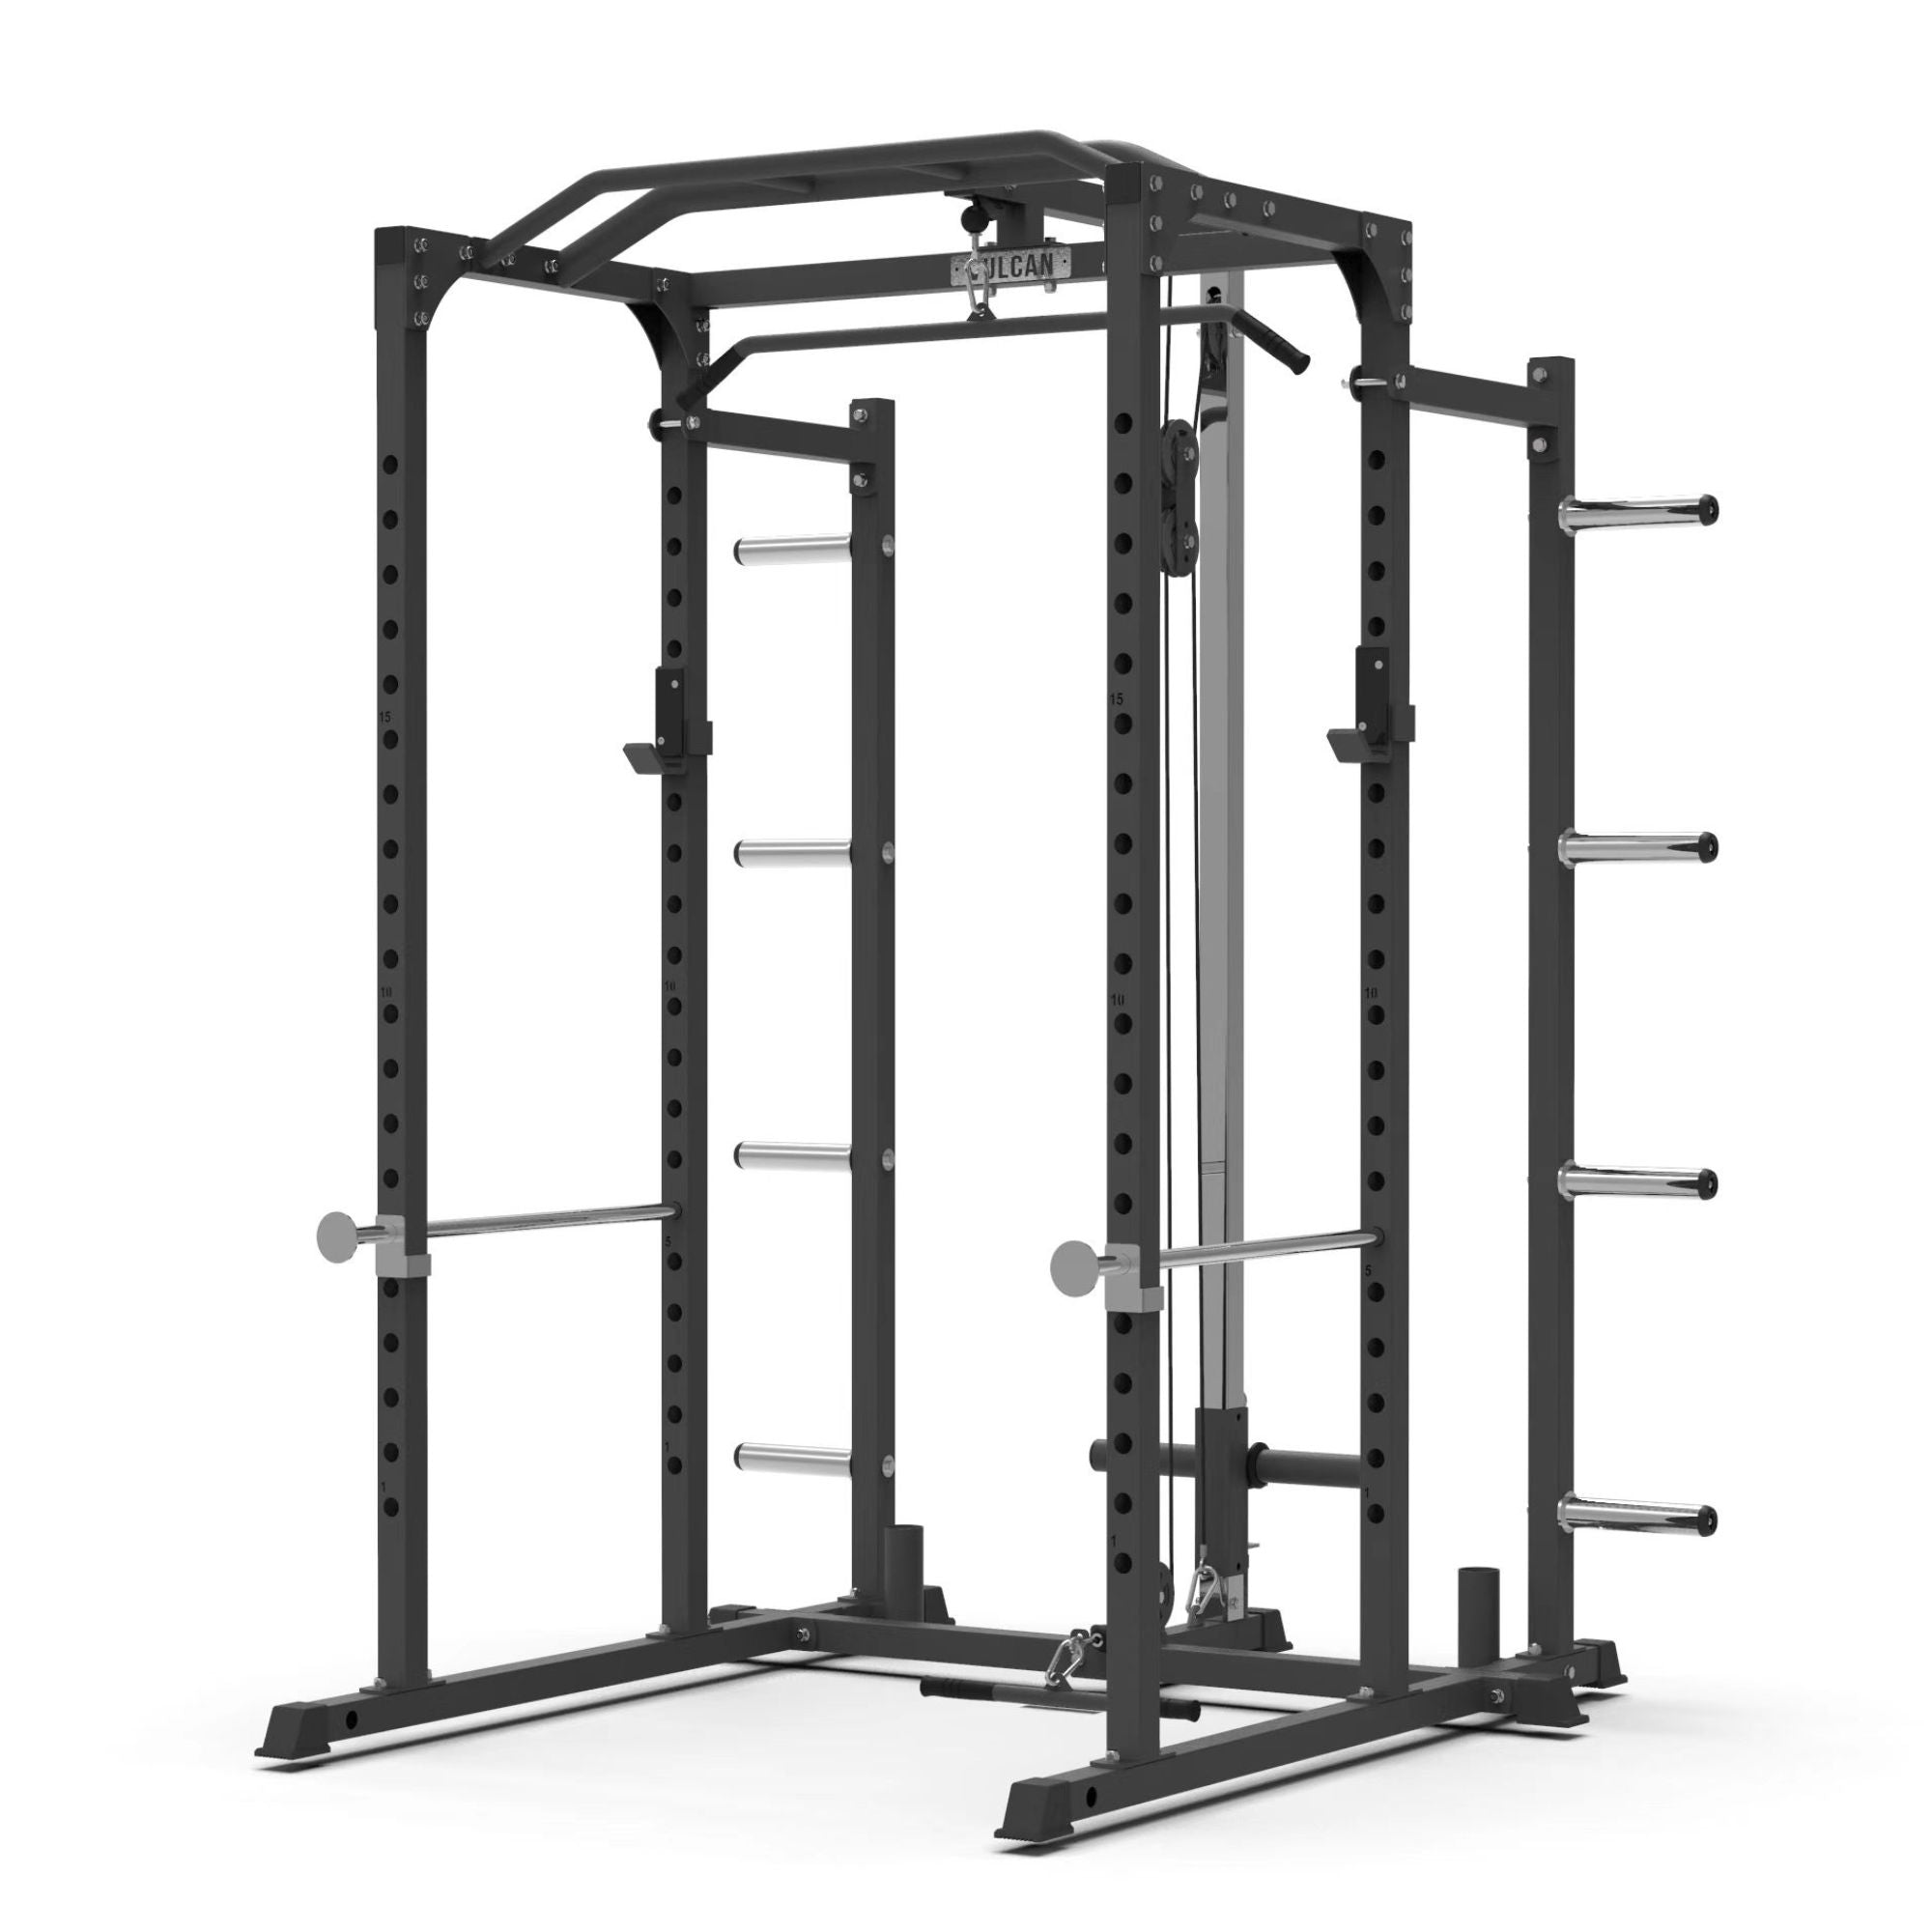 Home gym power rack with lat/row attachment and extension kit